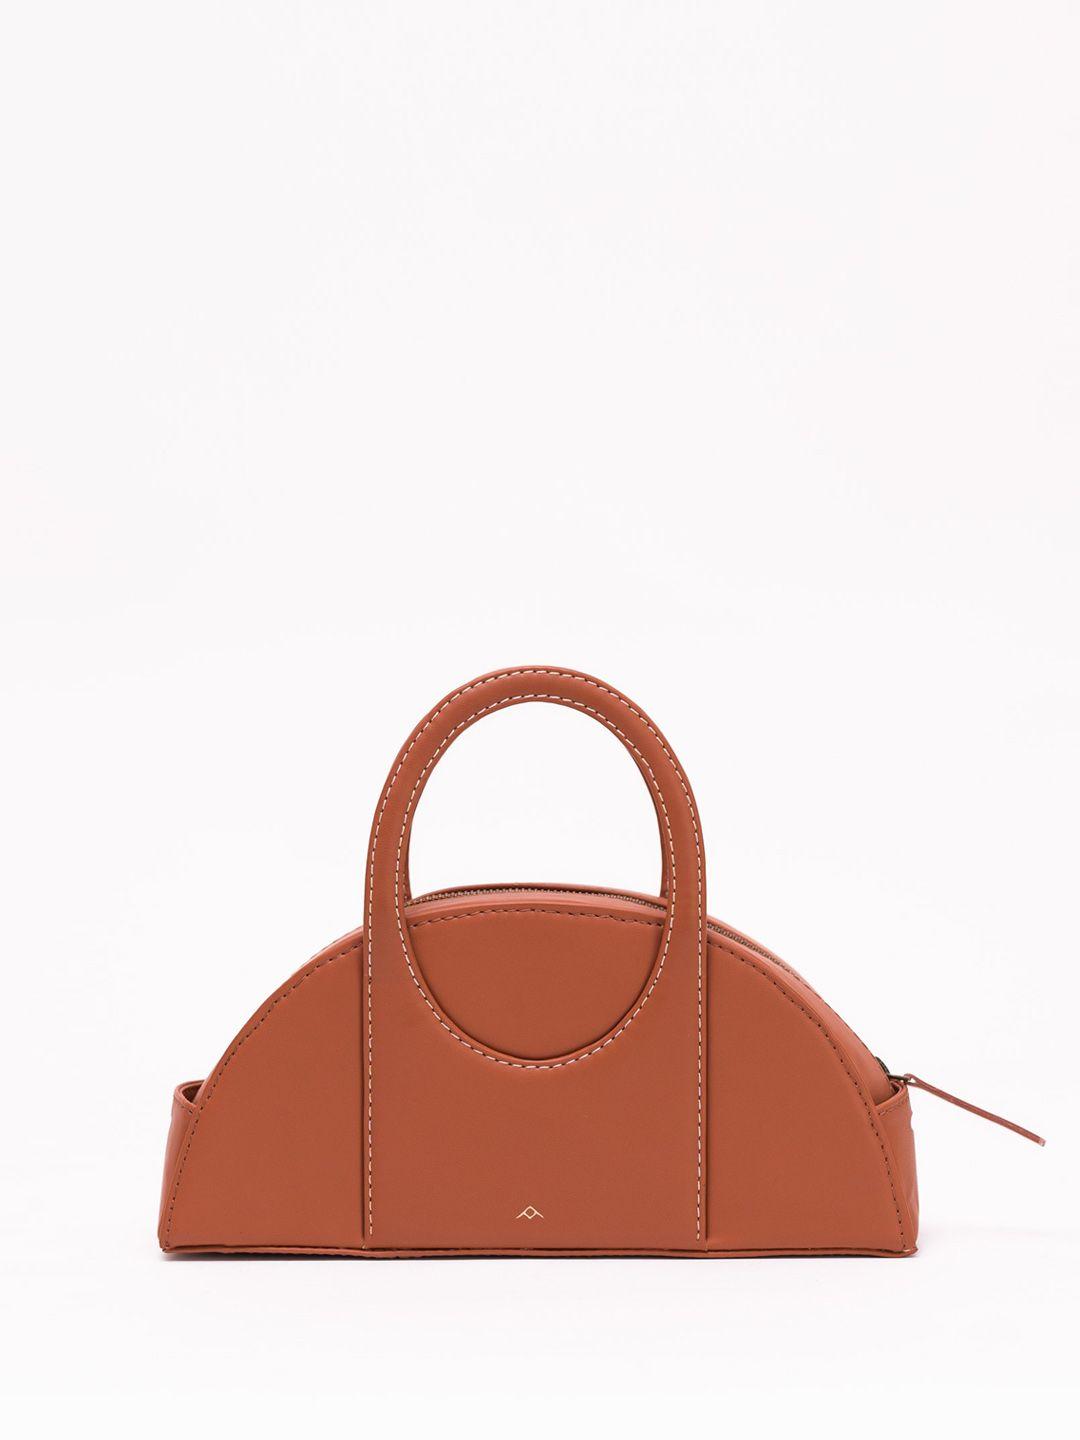 tann trim structured handheld bag with bow detail